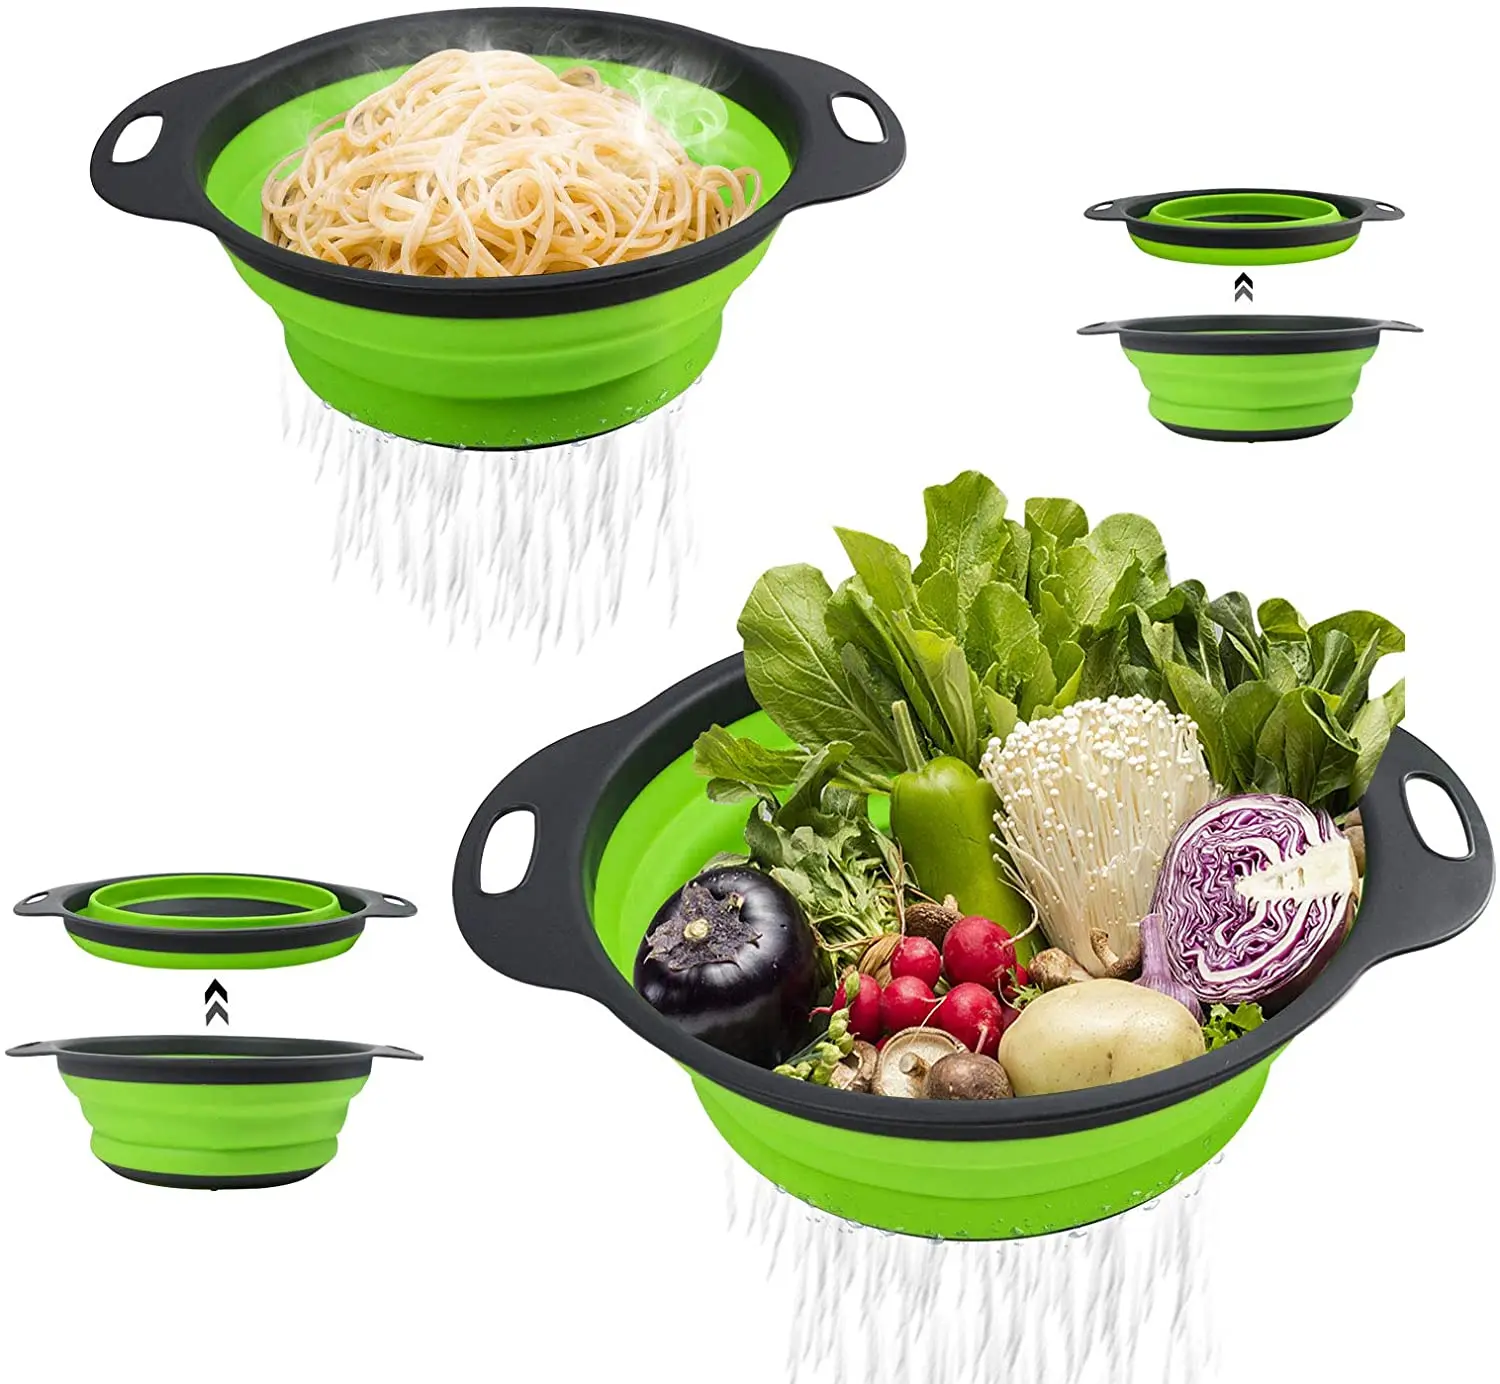 

Space Saver 11.6 inches Collapsible Silicone Plastic Vegetable Strainers 4 Quart Folding Kitchen Fruit Pasta Strainer, Green